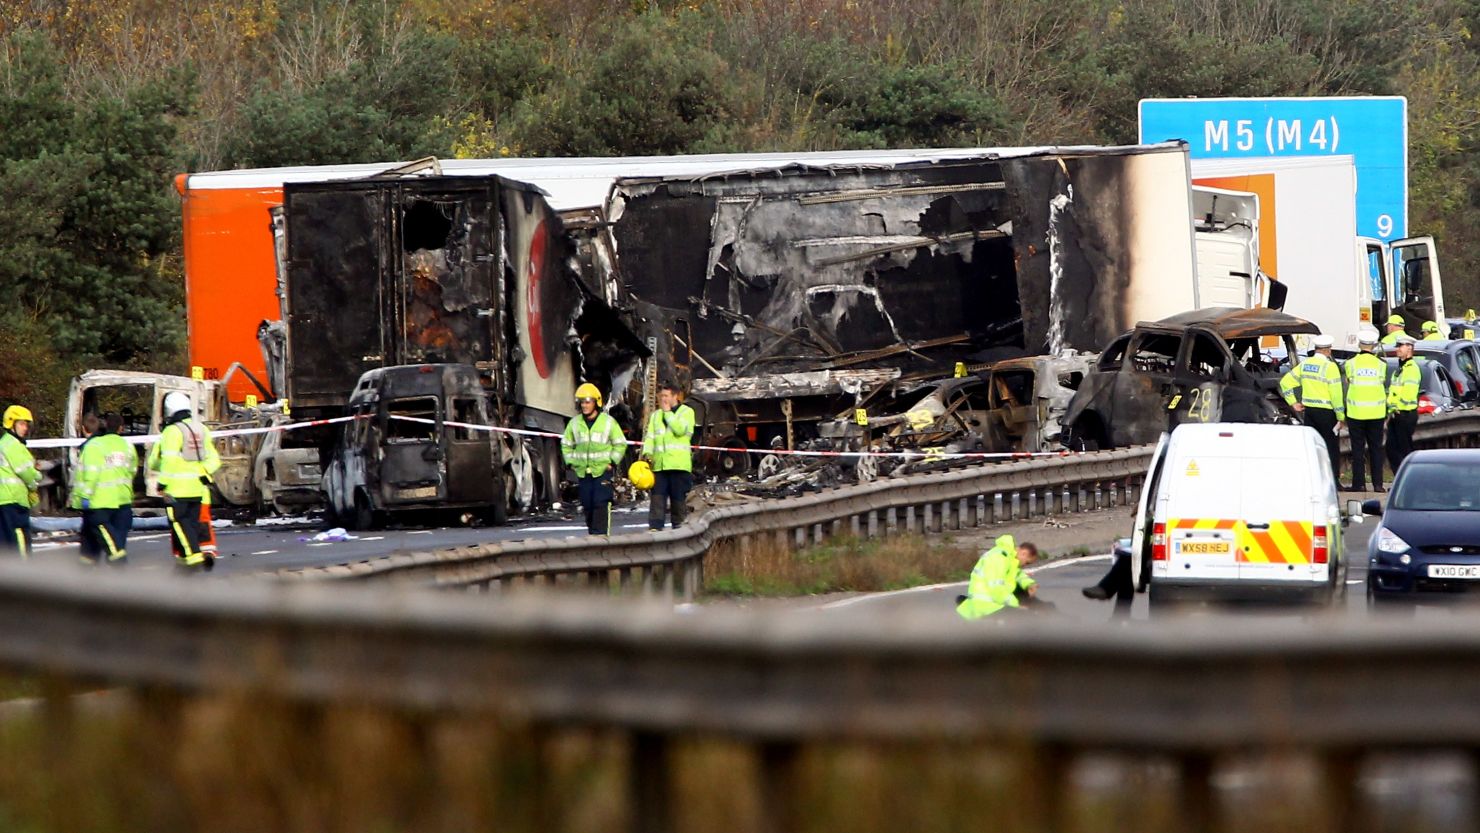 Workers attend the scene of a multivehicle crash on the M5 motorway on Saturday in Taunton, England.